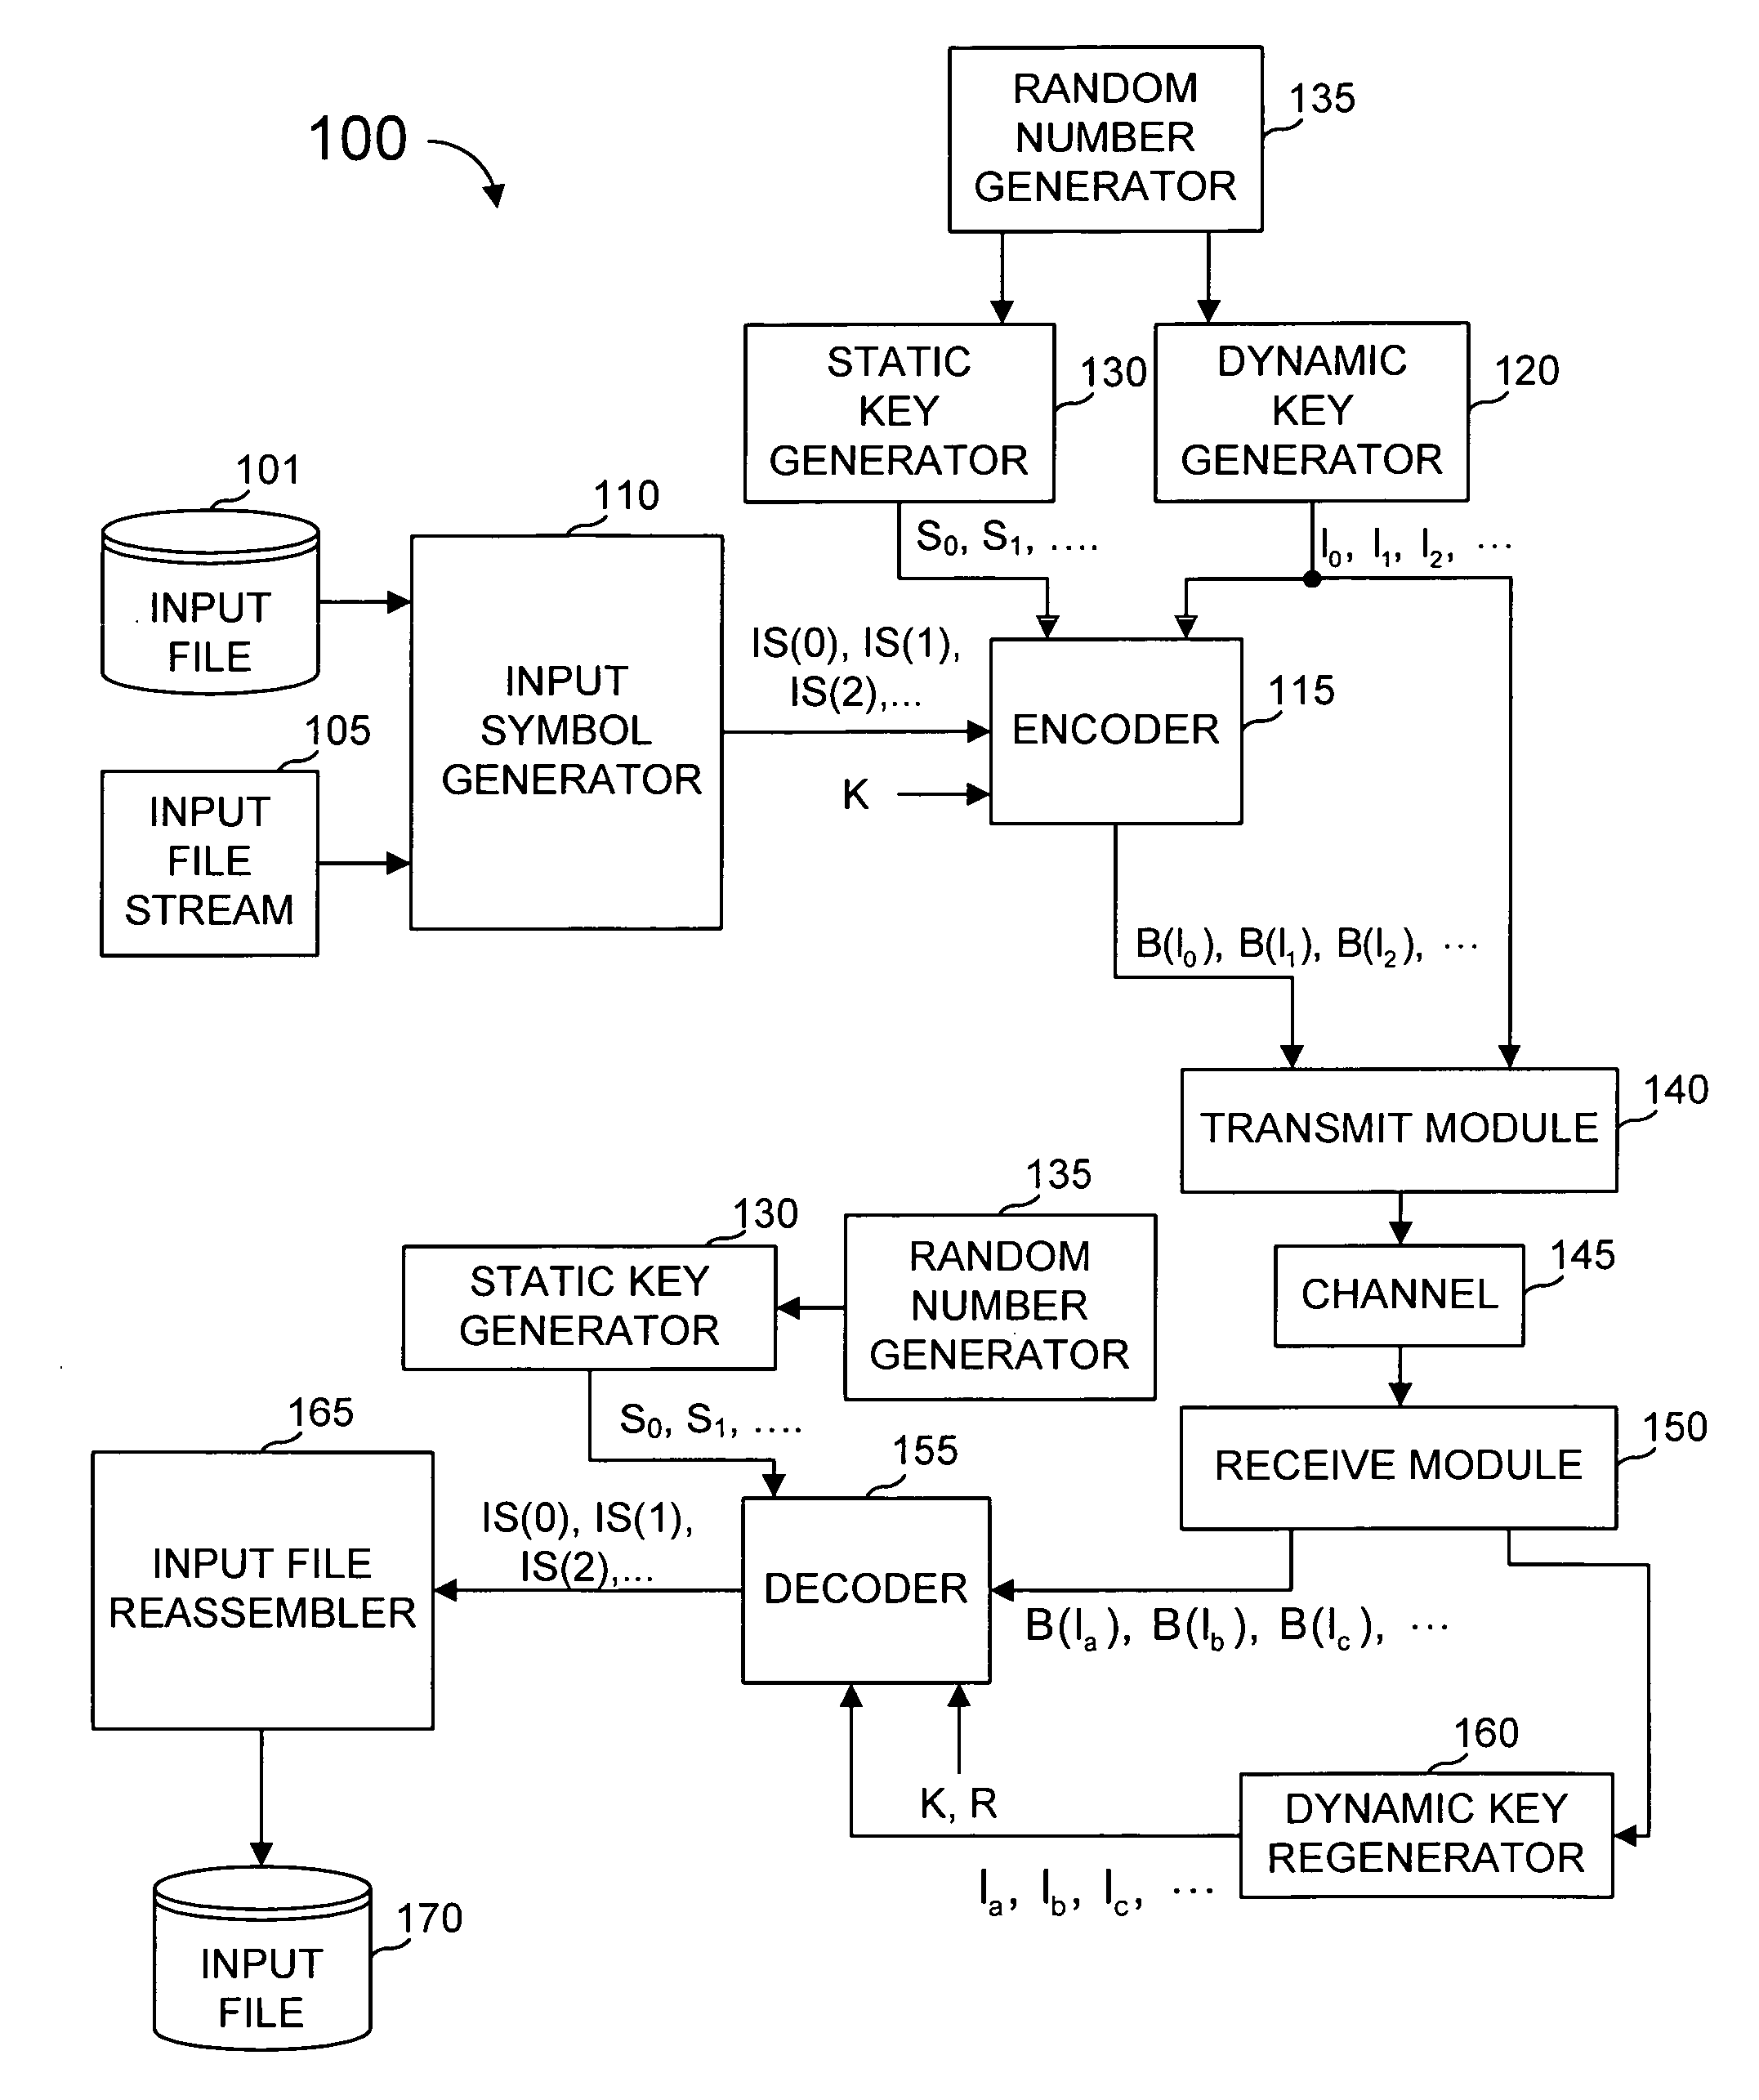 Method and apparatus for fast encoding of data symbols according to half-weight codes